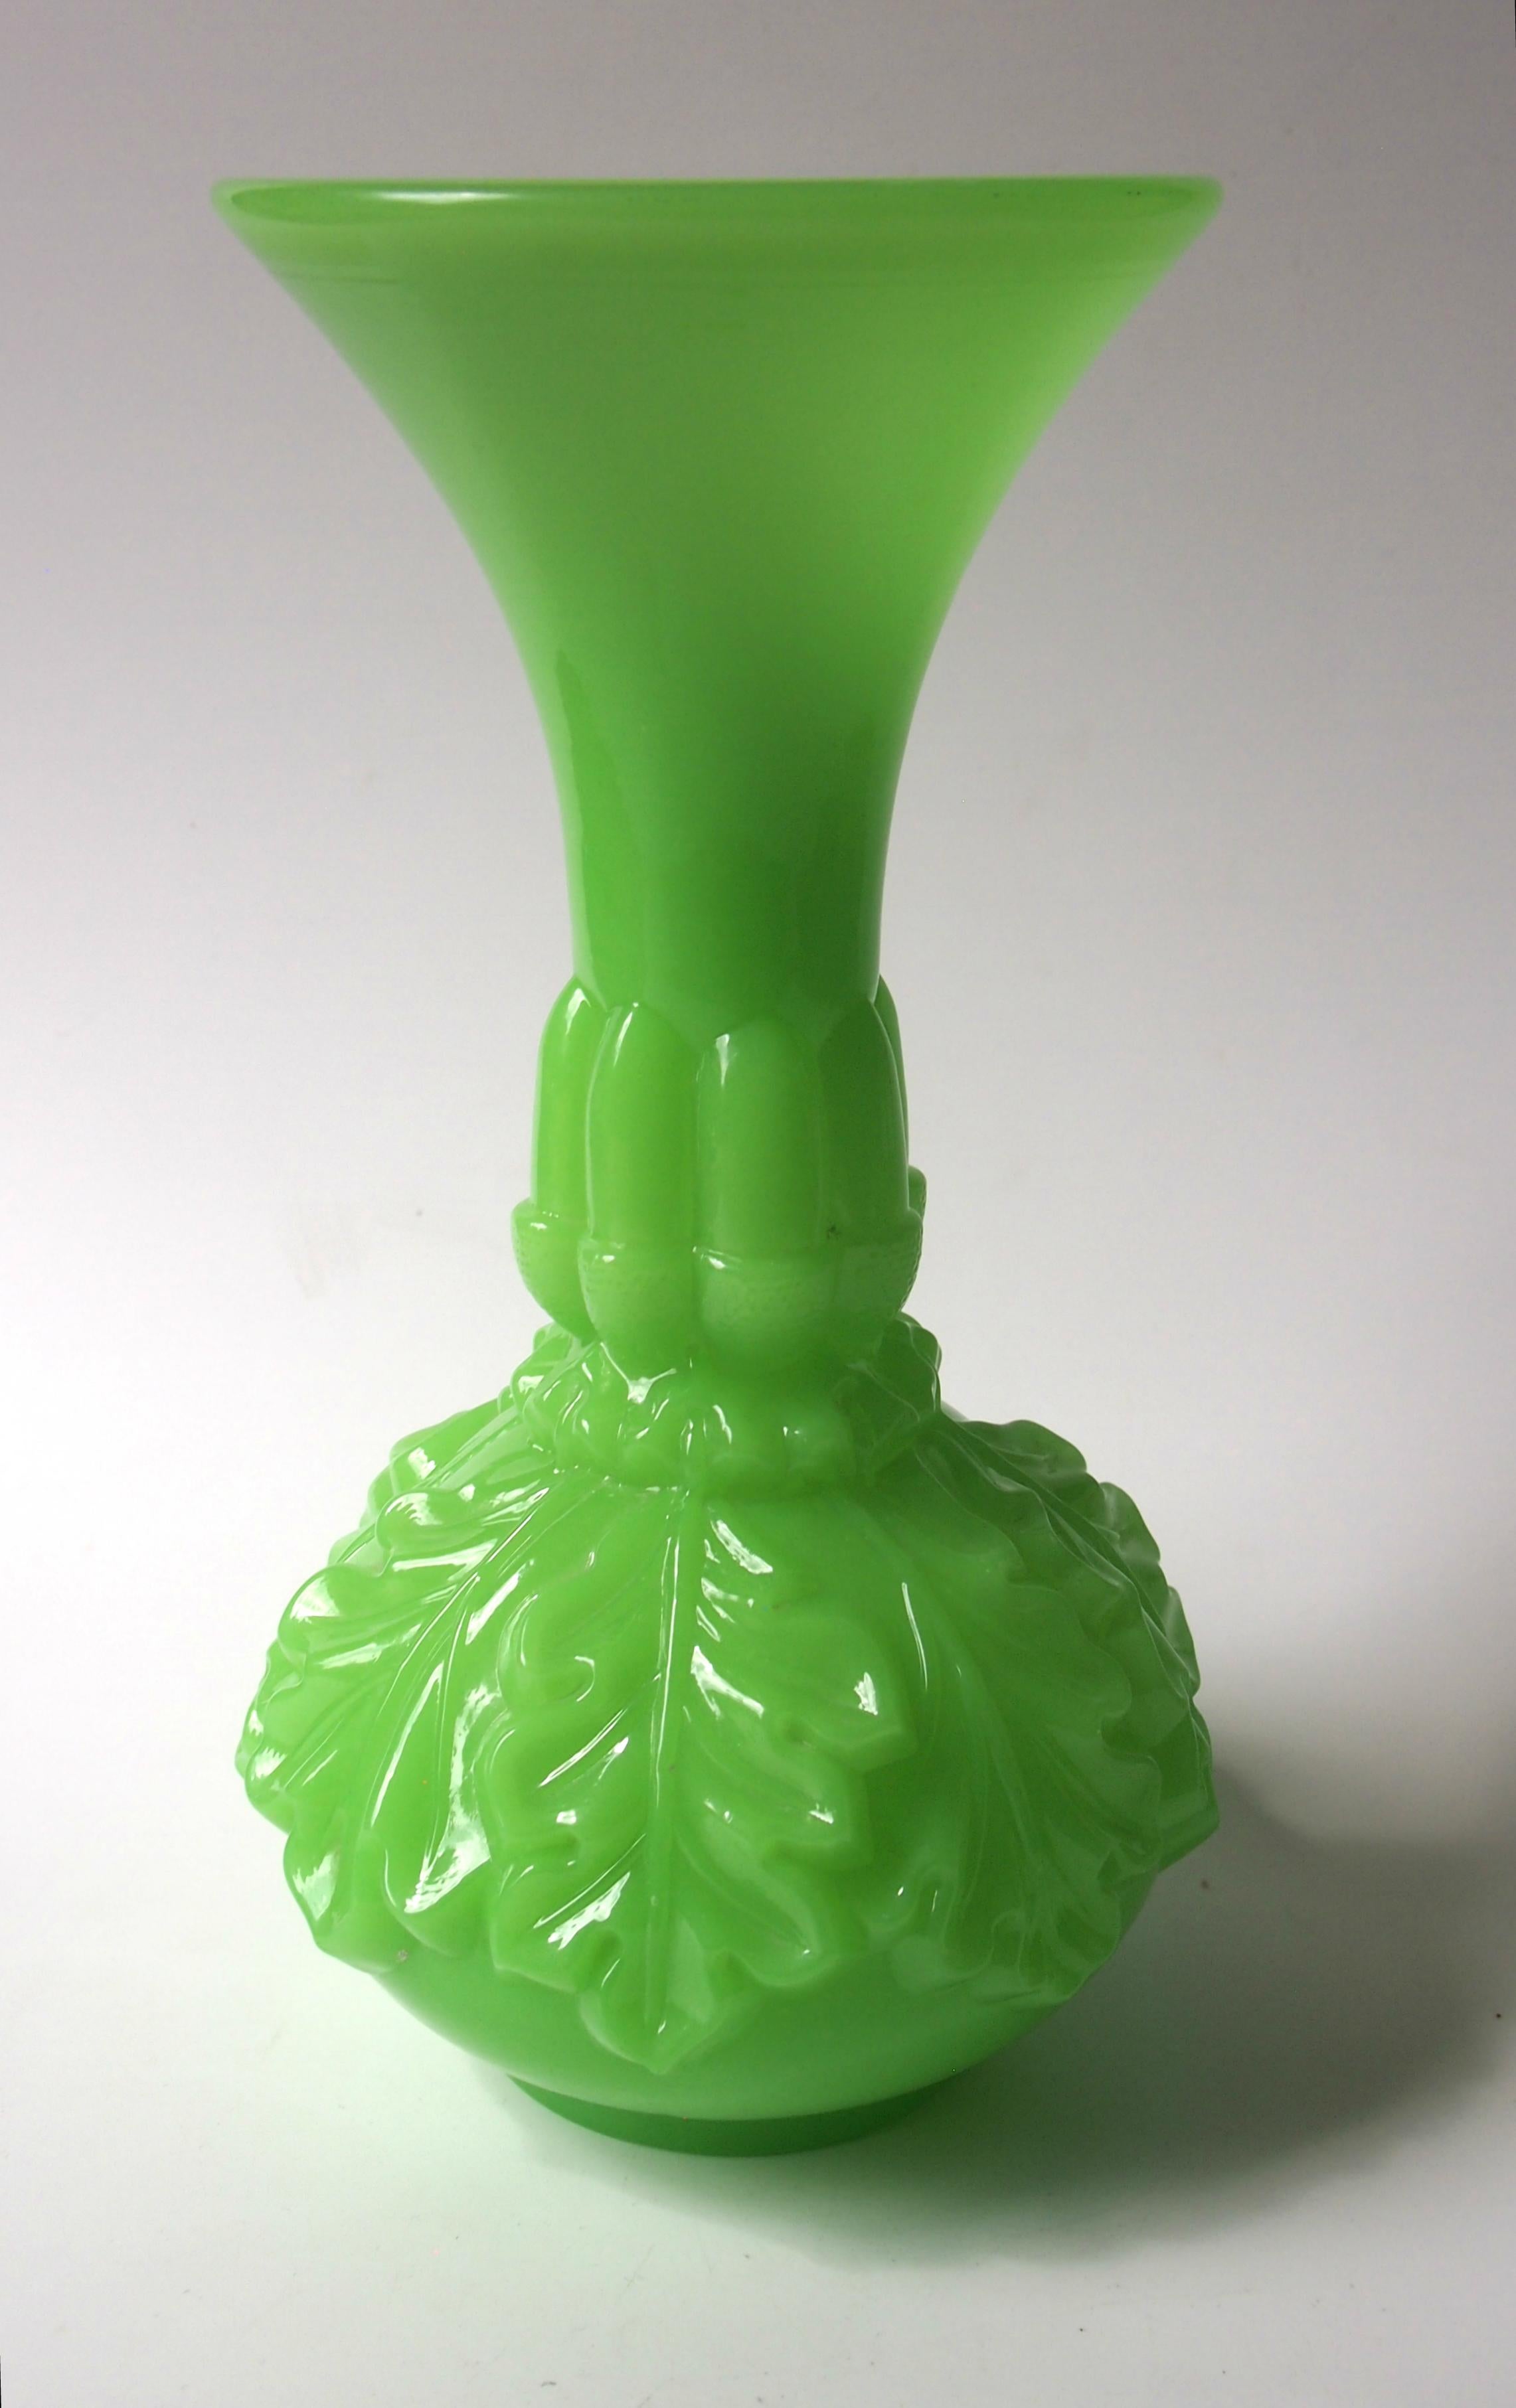 Classic Louis Philippe Baccarat Perroquet (literally parrot green) vase with 'blind' decoration. According to references this style and color were first created at Baccarat in 1842 by Francois-Eugene de Fontenay.

Baccarat is, and has been, the